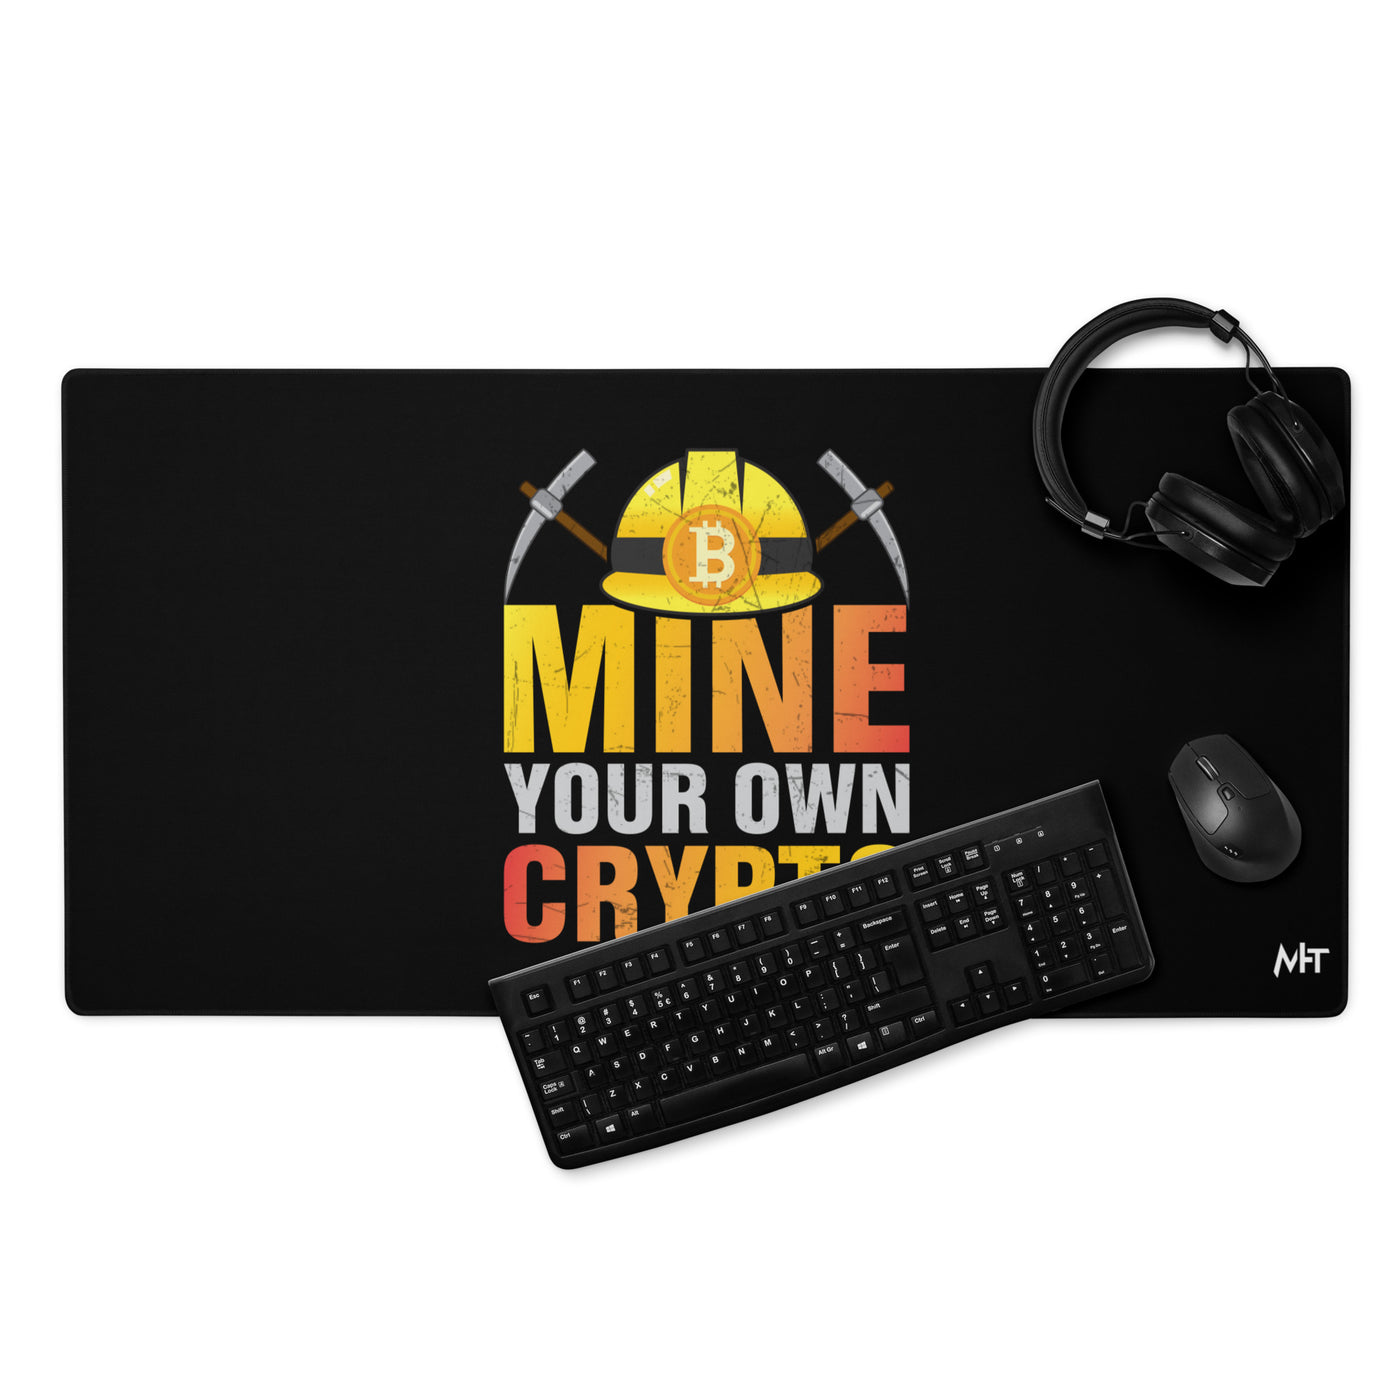 Mine your own Crypto - Desk Mat